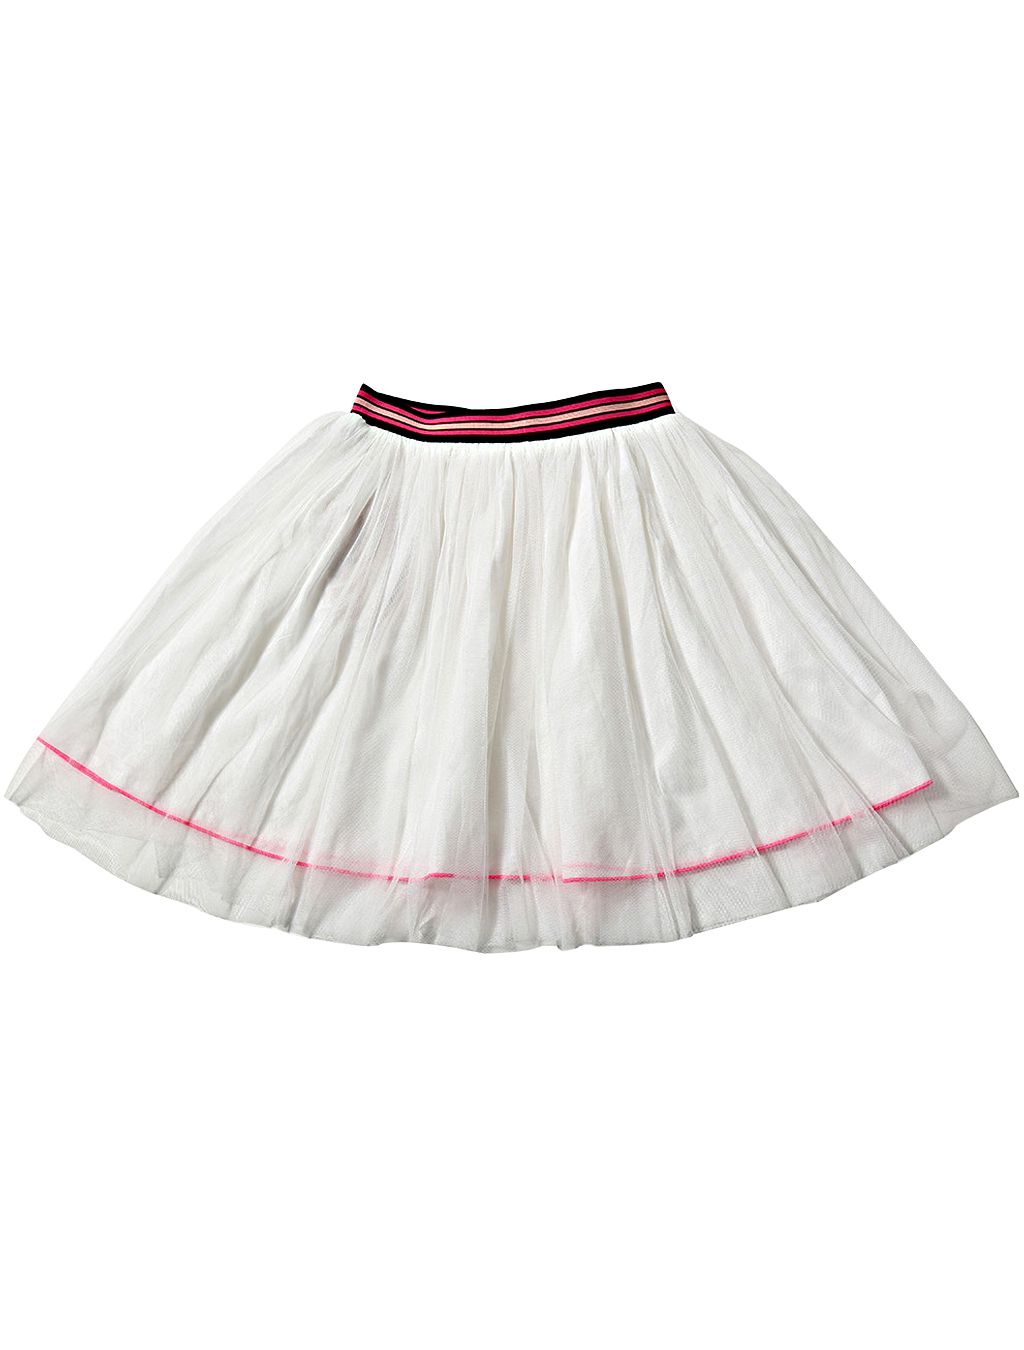 Tiddlywings Candy floss and cotton Mesh Girl Skirt for Regular Events ...